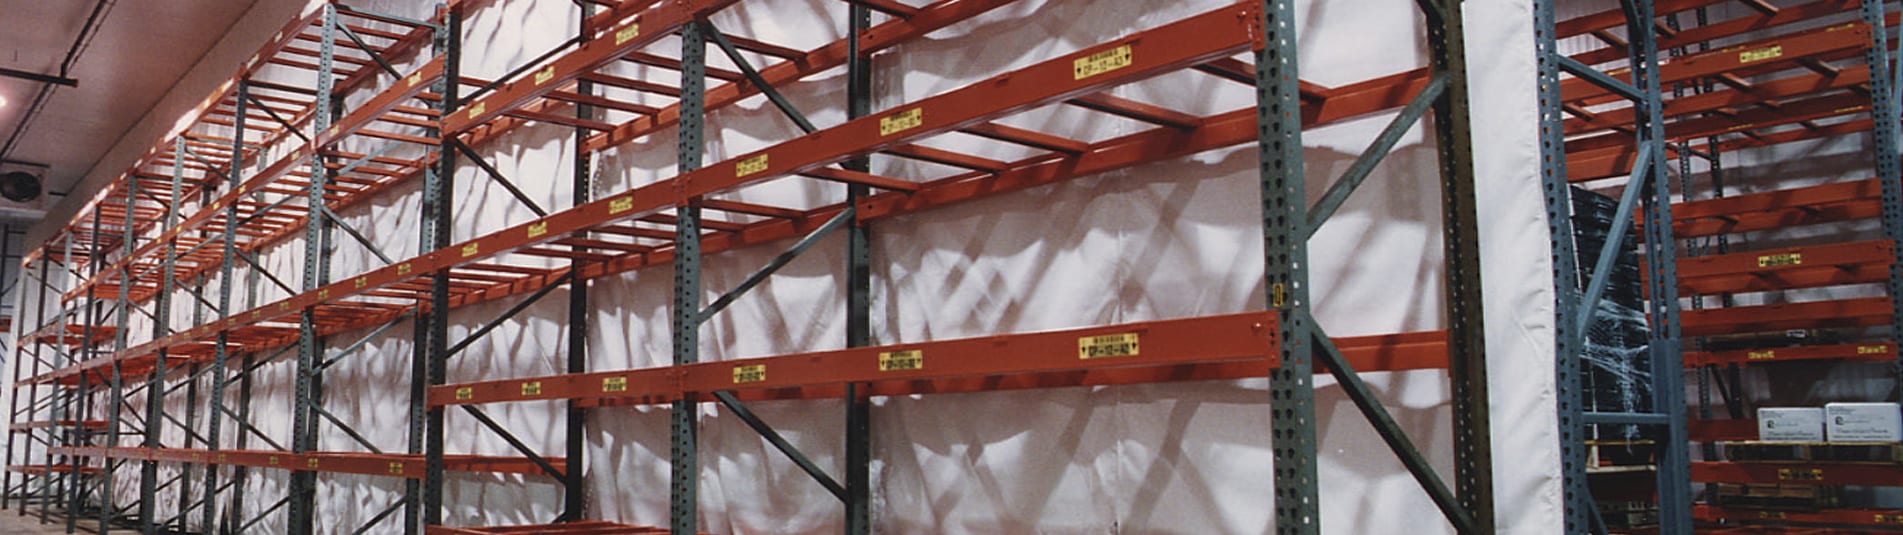 InsulWall was the insulated curtain wall solution for Chex Finer Foods